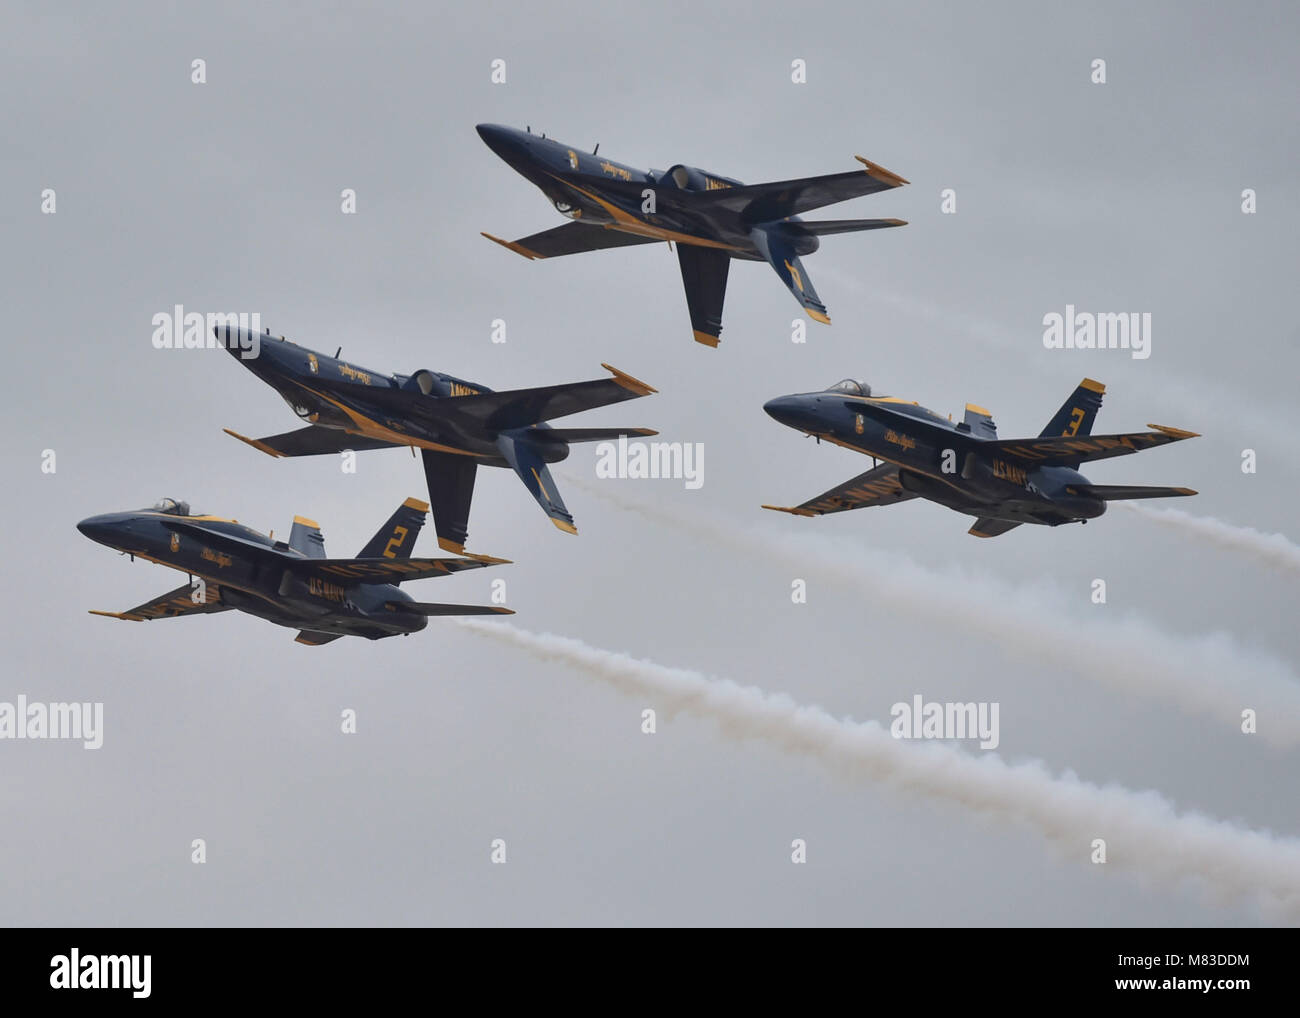 180310-N-ZC358-143  NAF EL CENTRO, Calif. (March 10, 2018) The Blue Angels Diamond performs the Double Farvel during the NAF El Centro 2018 Air Show. The Blue Angels are scheduled to perform more than 60 demonstrations at more than 30 locations across the U.S. in 2018. (U.S. Navy photo by Mass Communication Specialist 2nd Class Jess Gray/Released) Stock Photo